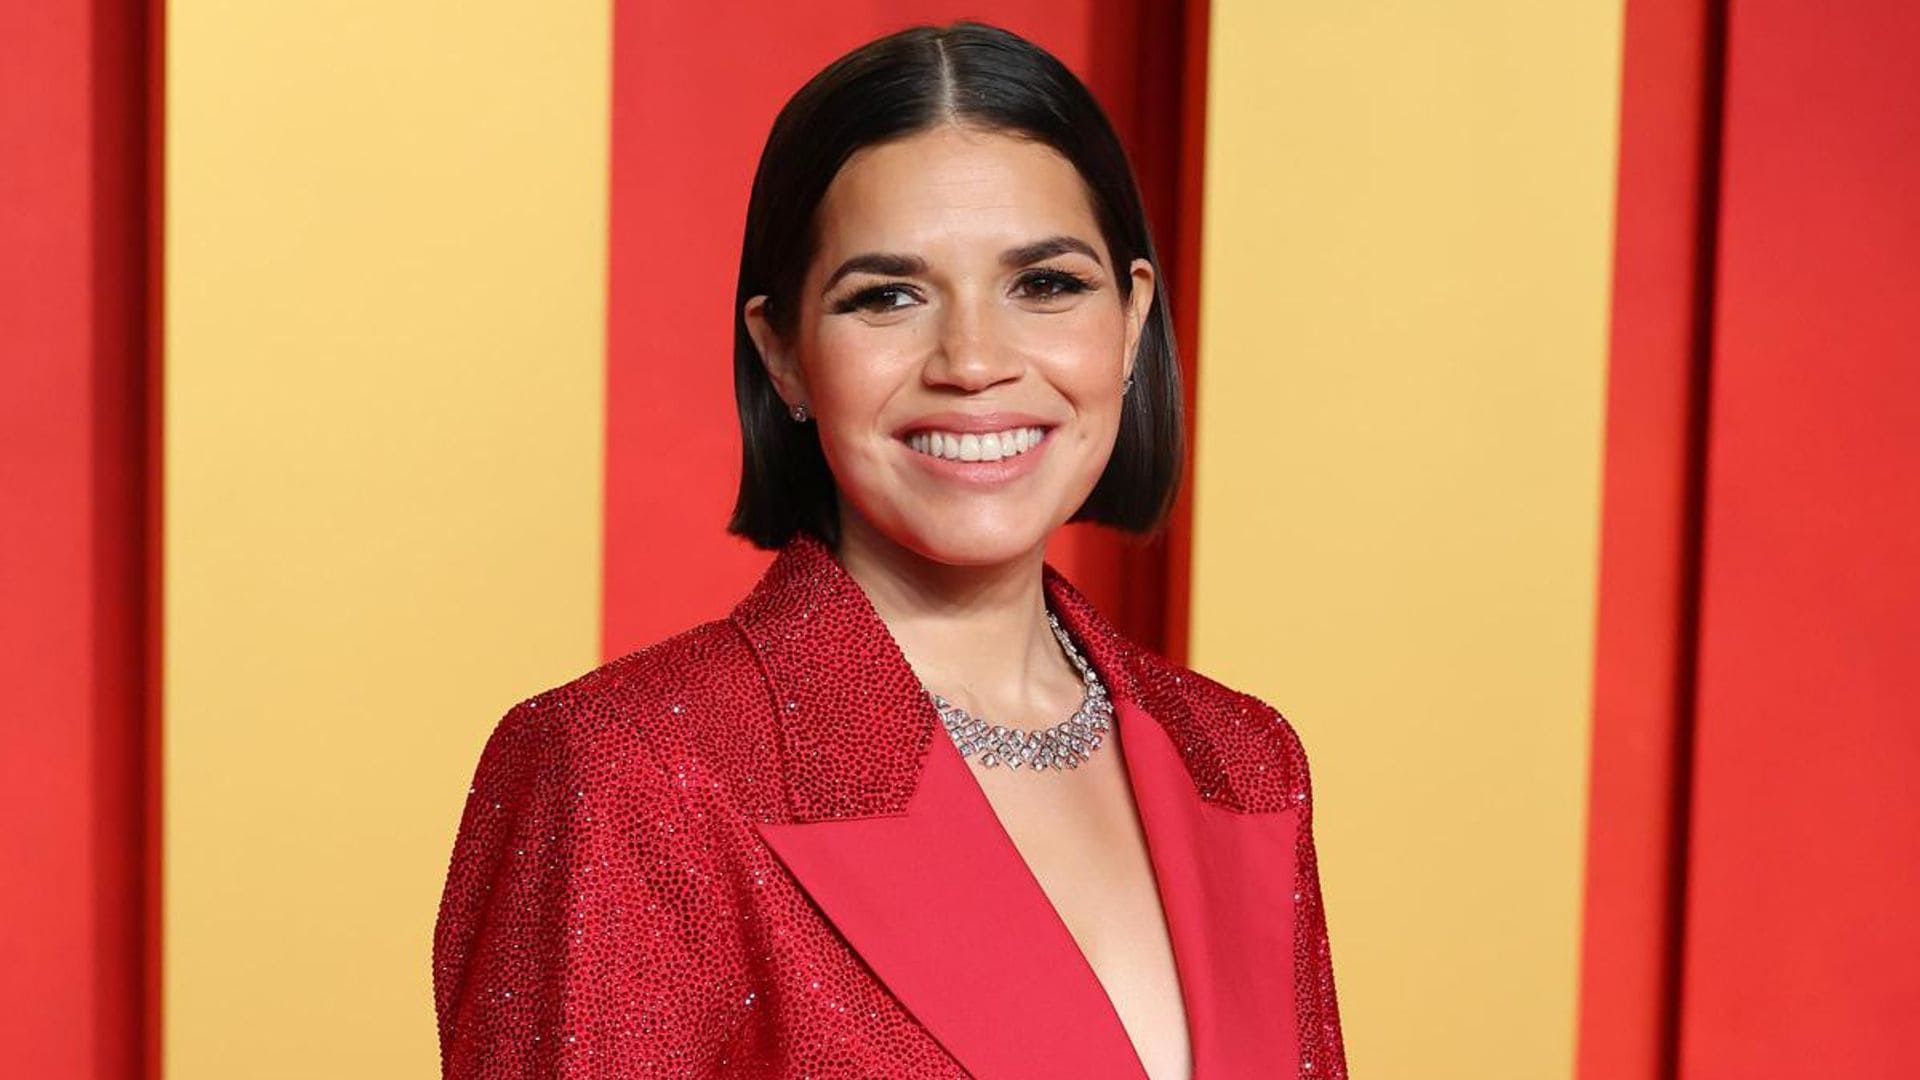 America Ferrera celebrates her 40th birthday with a call to action